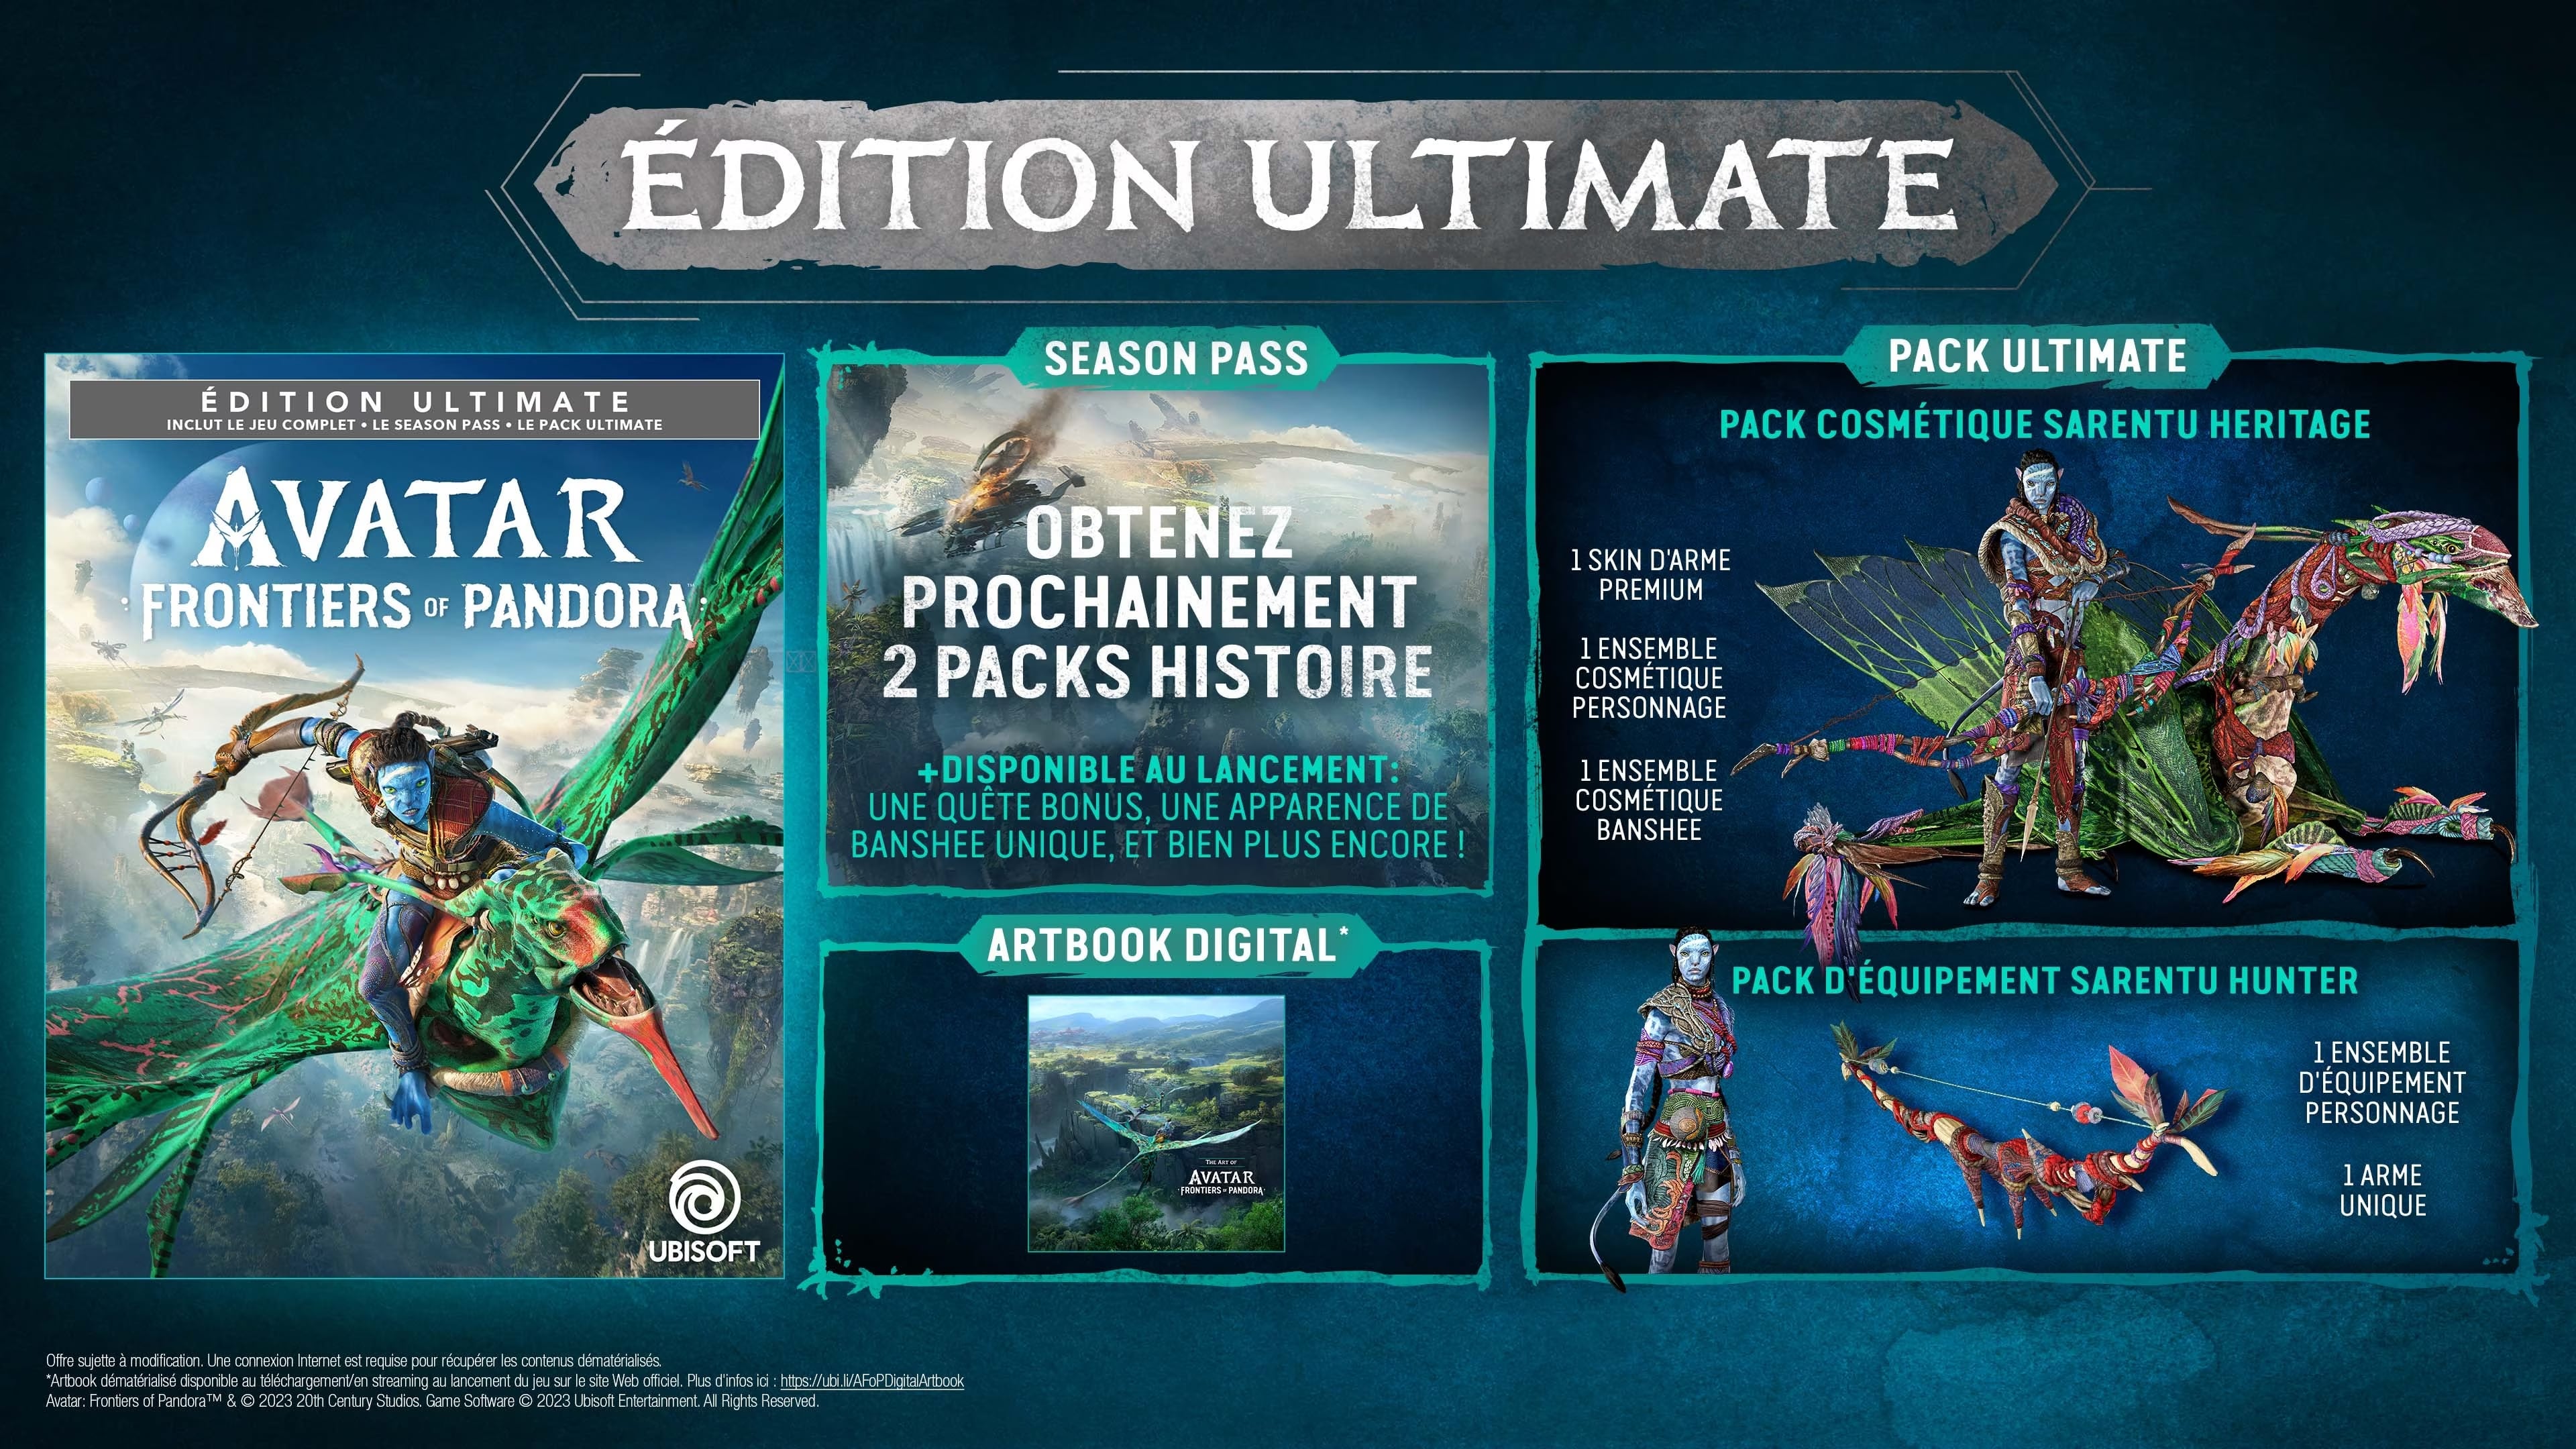 Edition ultimate avatar frontiers of pandora 3